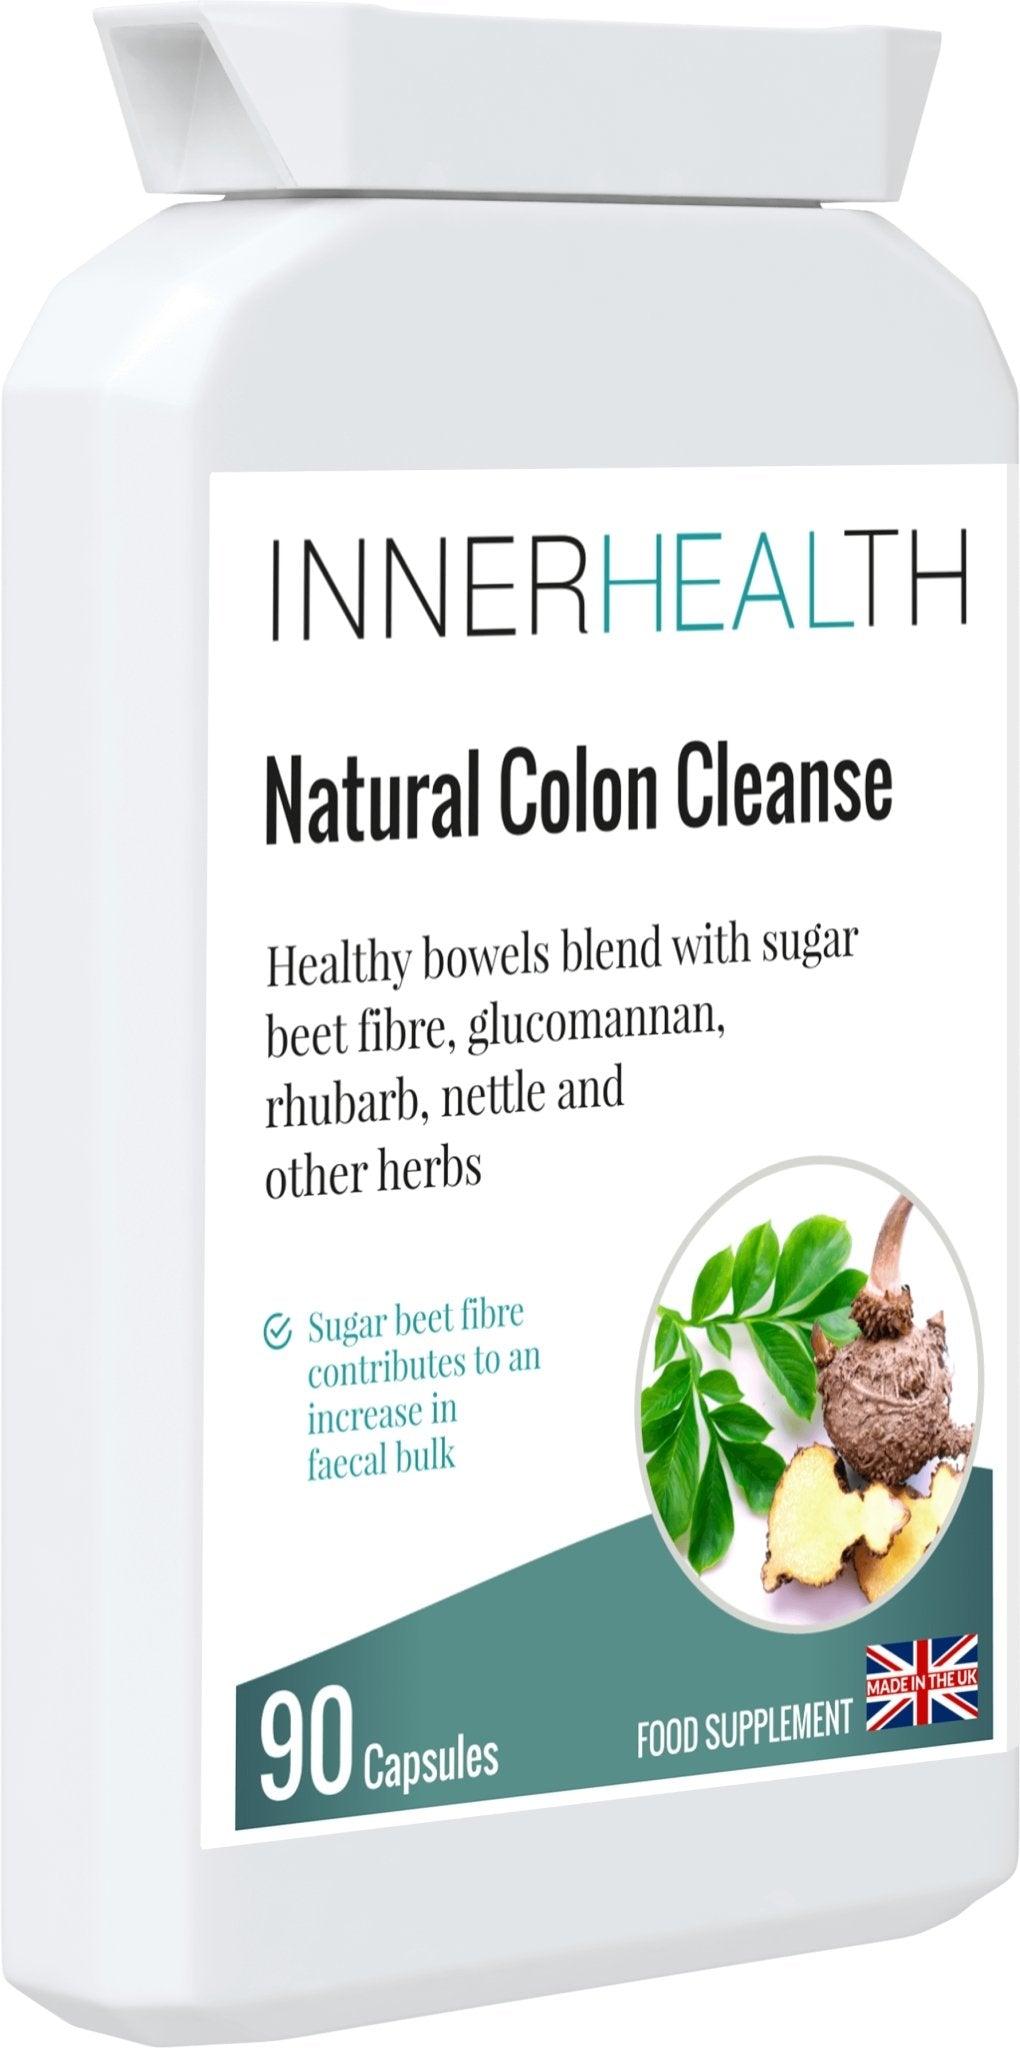 Natural Colon Cleanse - 90 Capsules - Inner Health Clinic